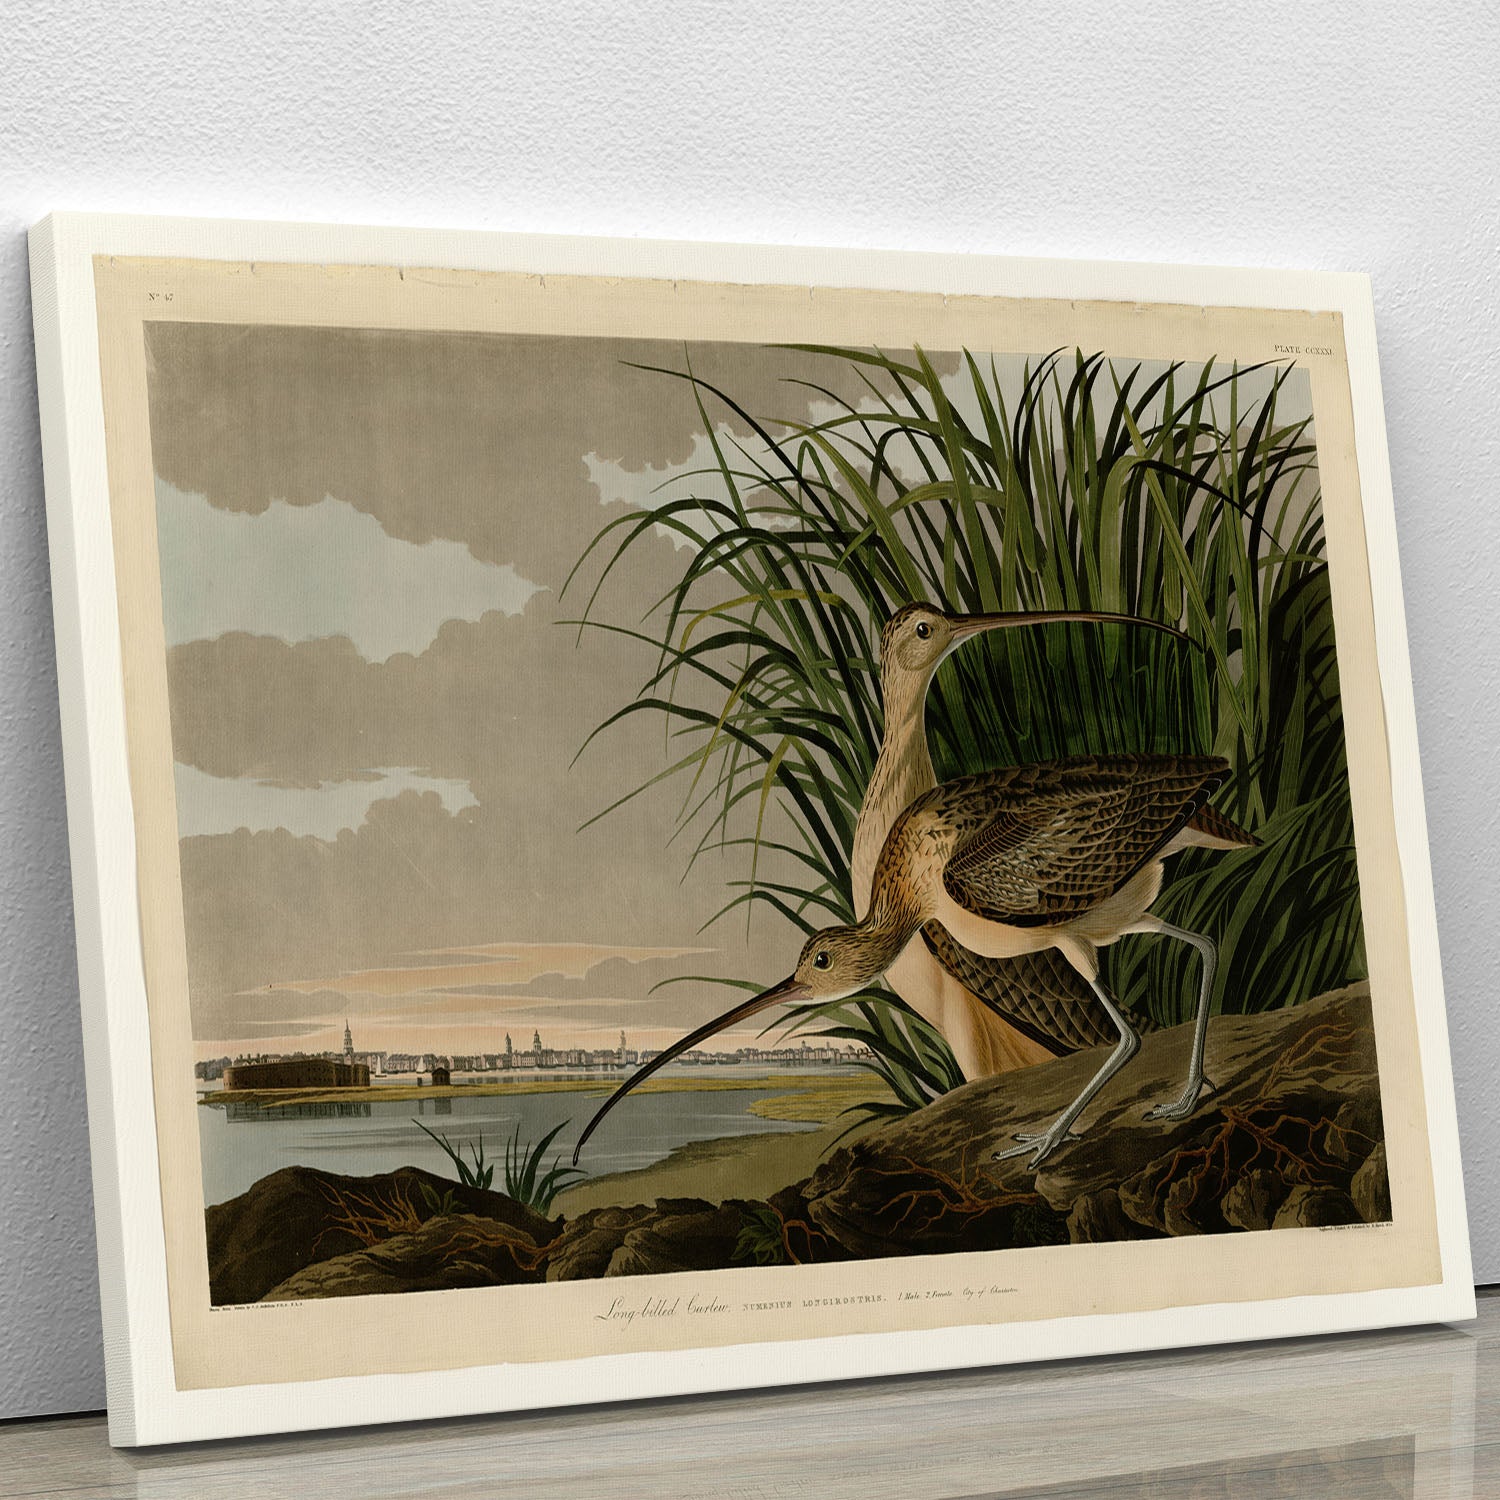 Long billed Curlew by Audubon Canvas Print or Poster - Canvas Art Rocks - 1